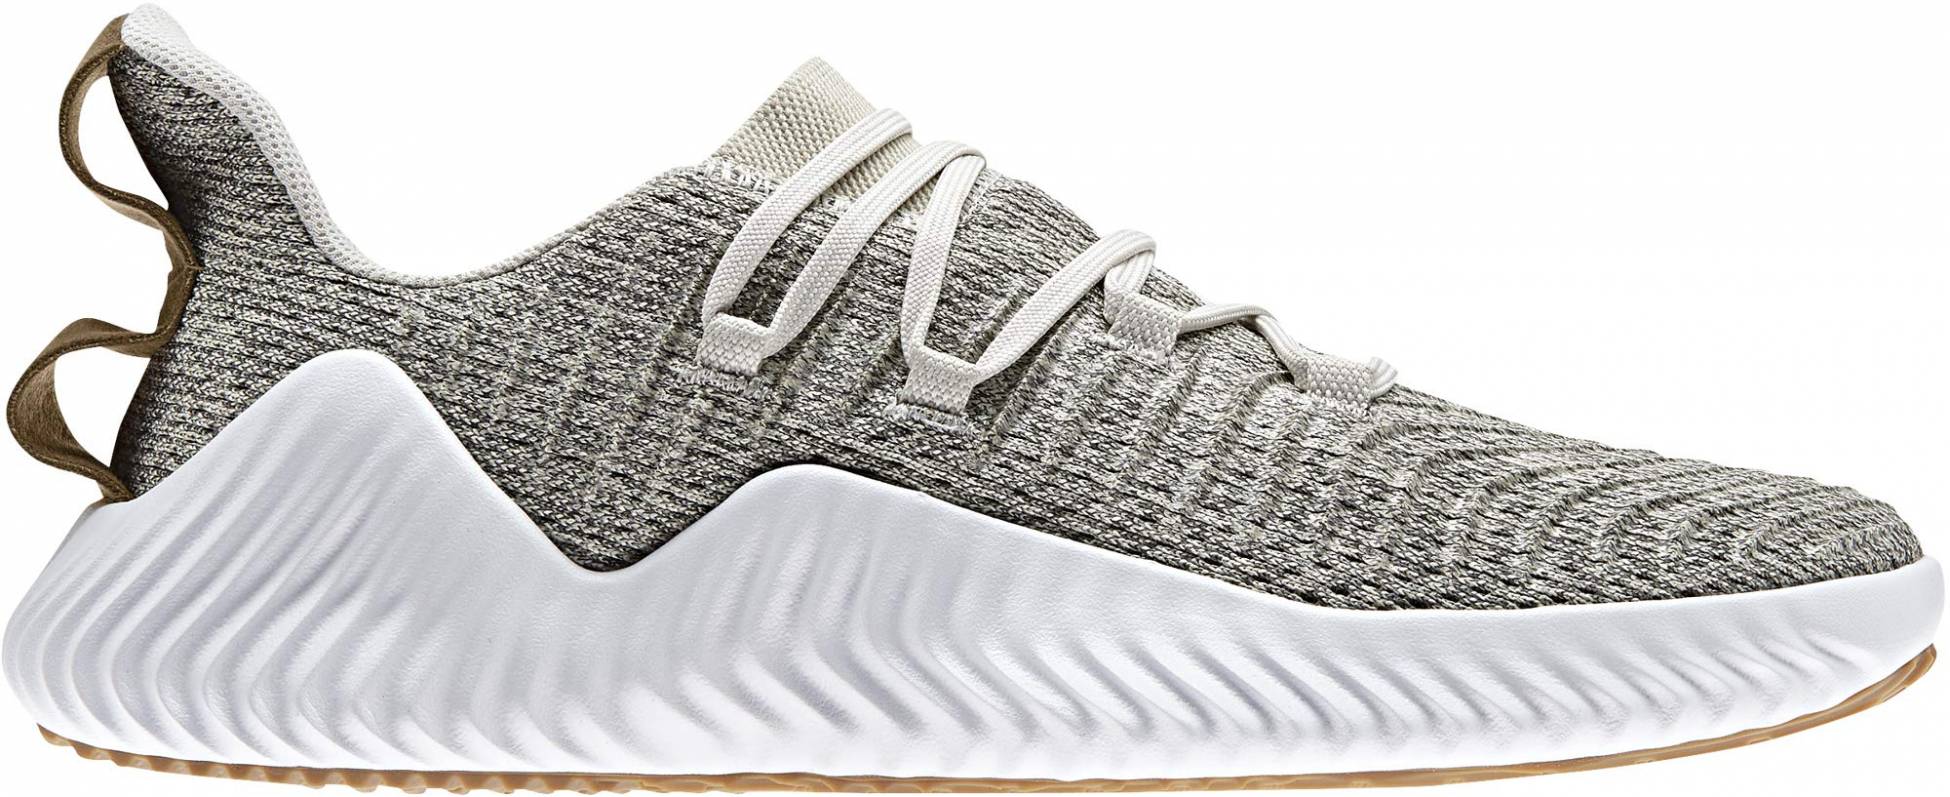 Adidas Alphabounce Trainer - Deals ($70), Facts, Reviews (2021 ...